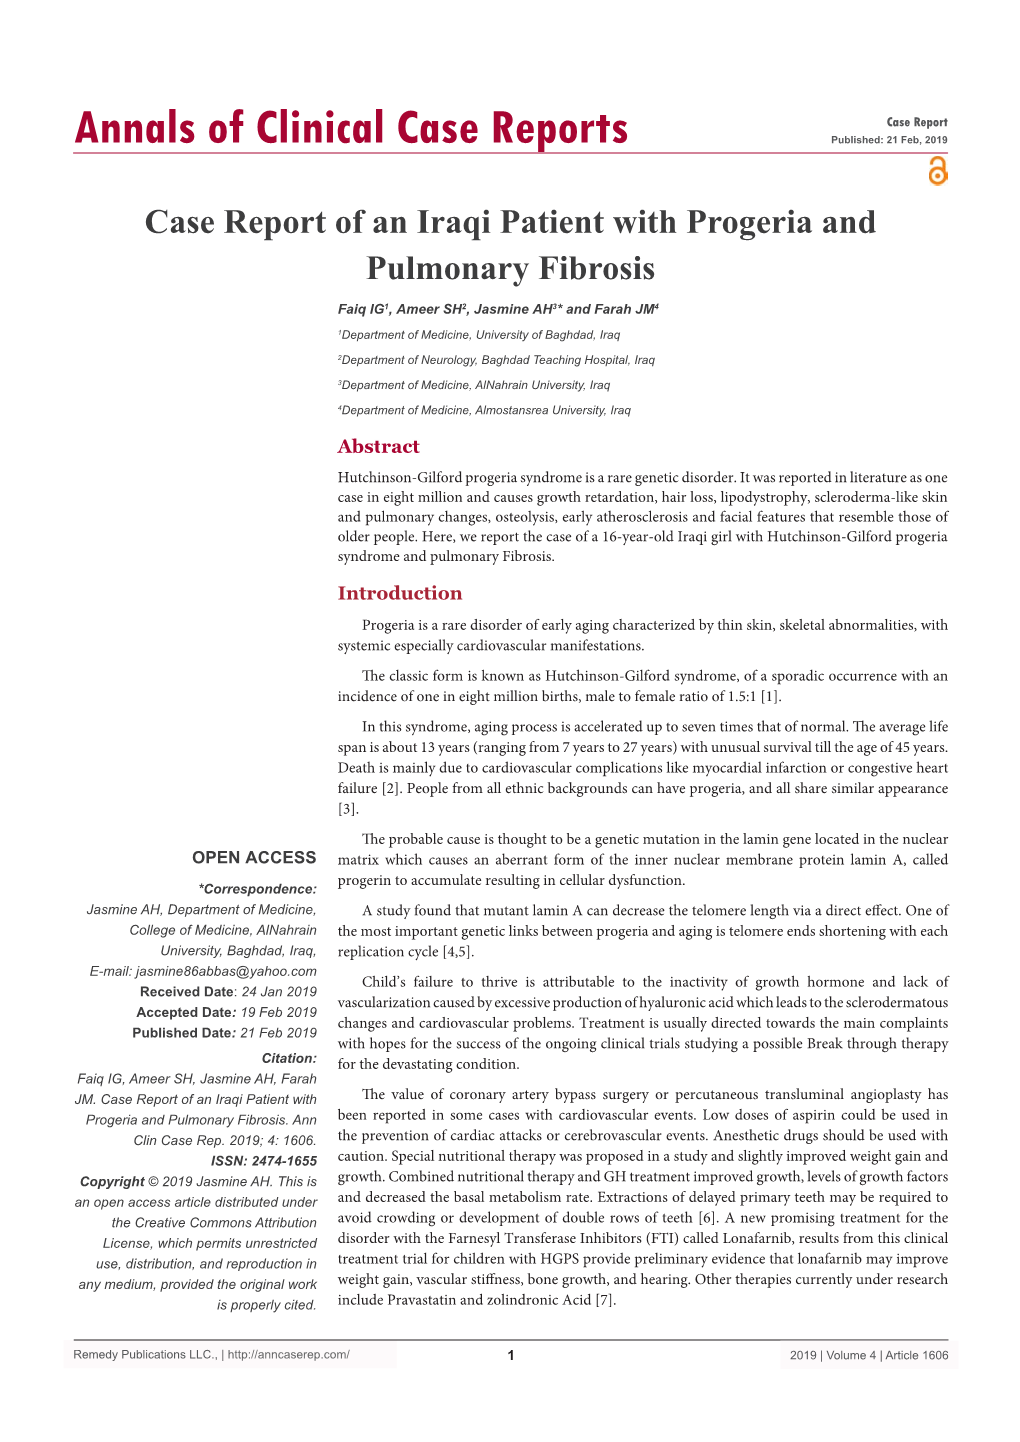 Case Report of an Iraqi Patient with Progeria and Pulmonary Fibrosis